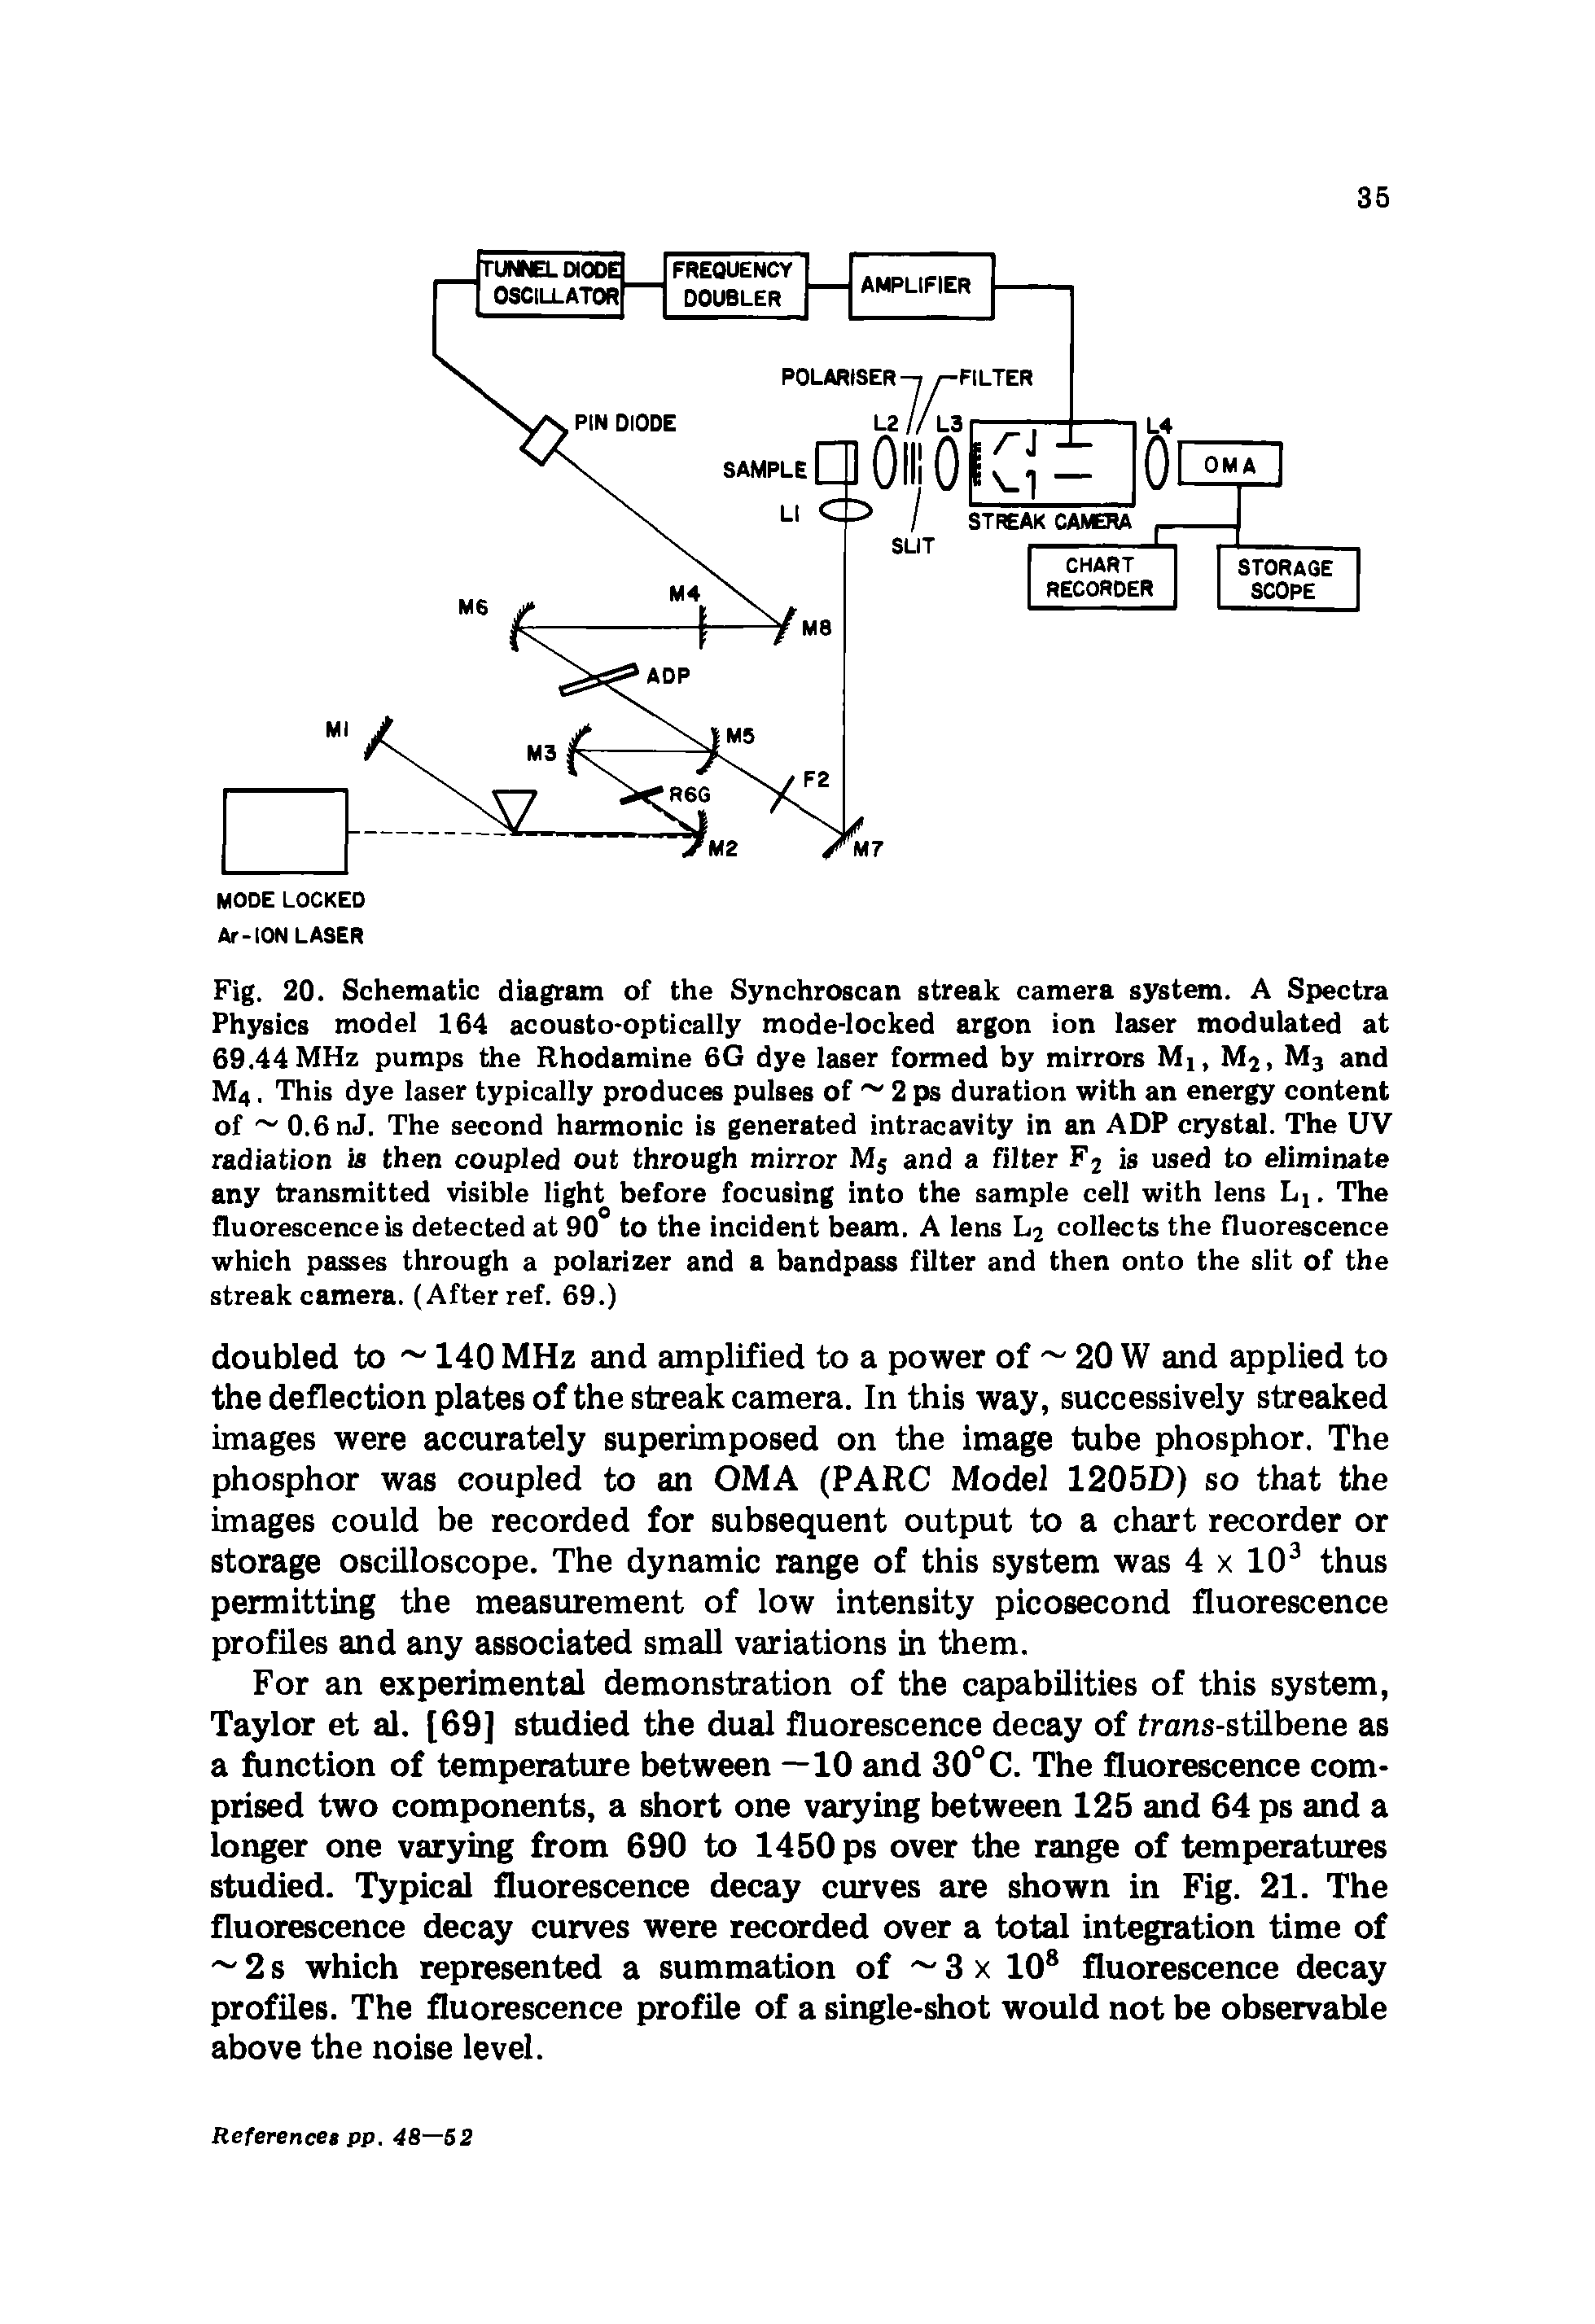 Fig. 20. Schematic diagram of the Synchroscan streak camera system. A Spectra Physics model 164 acousto-optically mode-locked argon ion laser modulated at 69.44MHz pumps the Rhodamine 6G dye laser formed by mirrors Mi, M2, M3 and M4. This dye laser typically produces pulses of 2 ps duration with an energy content of 0.6 nJ. The second harmonic is generated intracavity in an ADP crystal. The UV radiation is then coupled out through mirror Ms and a filter F2 is used to eliminate any transmitted visible light before focusing into the sample cell with lens Lt. The fluorescence is detected at 90 to the incident beam. A lens L2 collects the fluorescence which passes through a polarizer and a bandpass filter and then onto the slit of the streak camera. (After ref. 69.)...